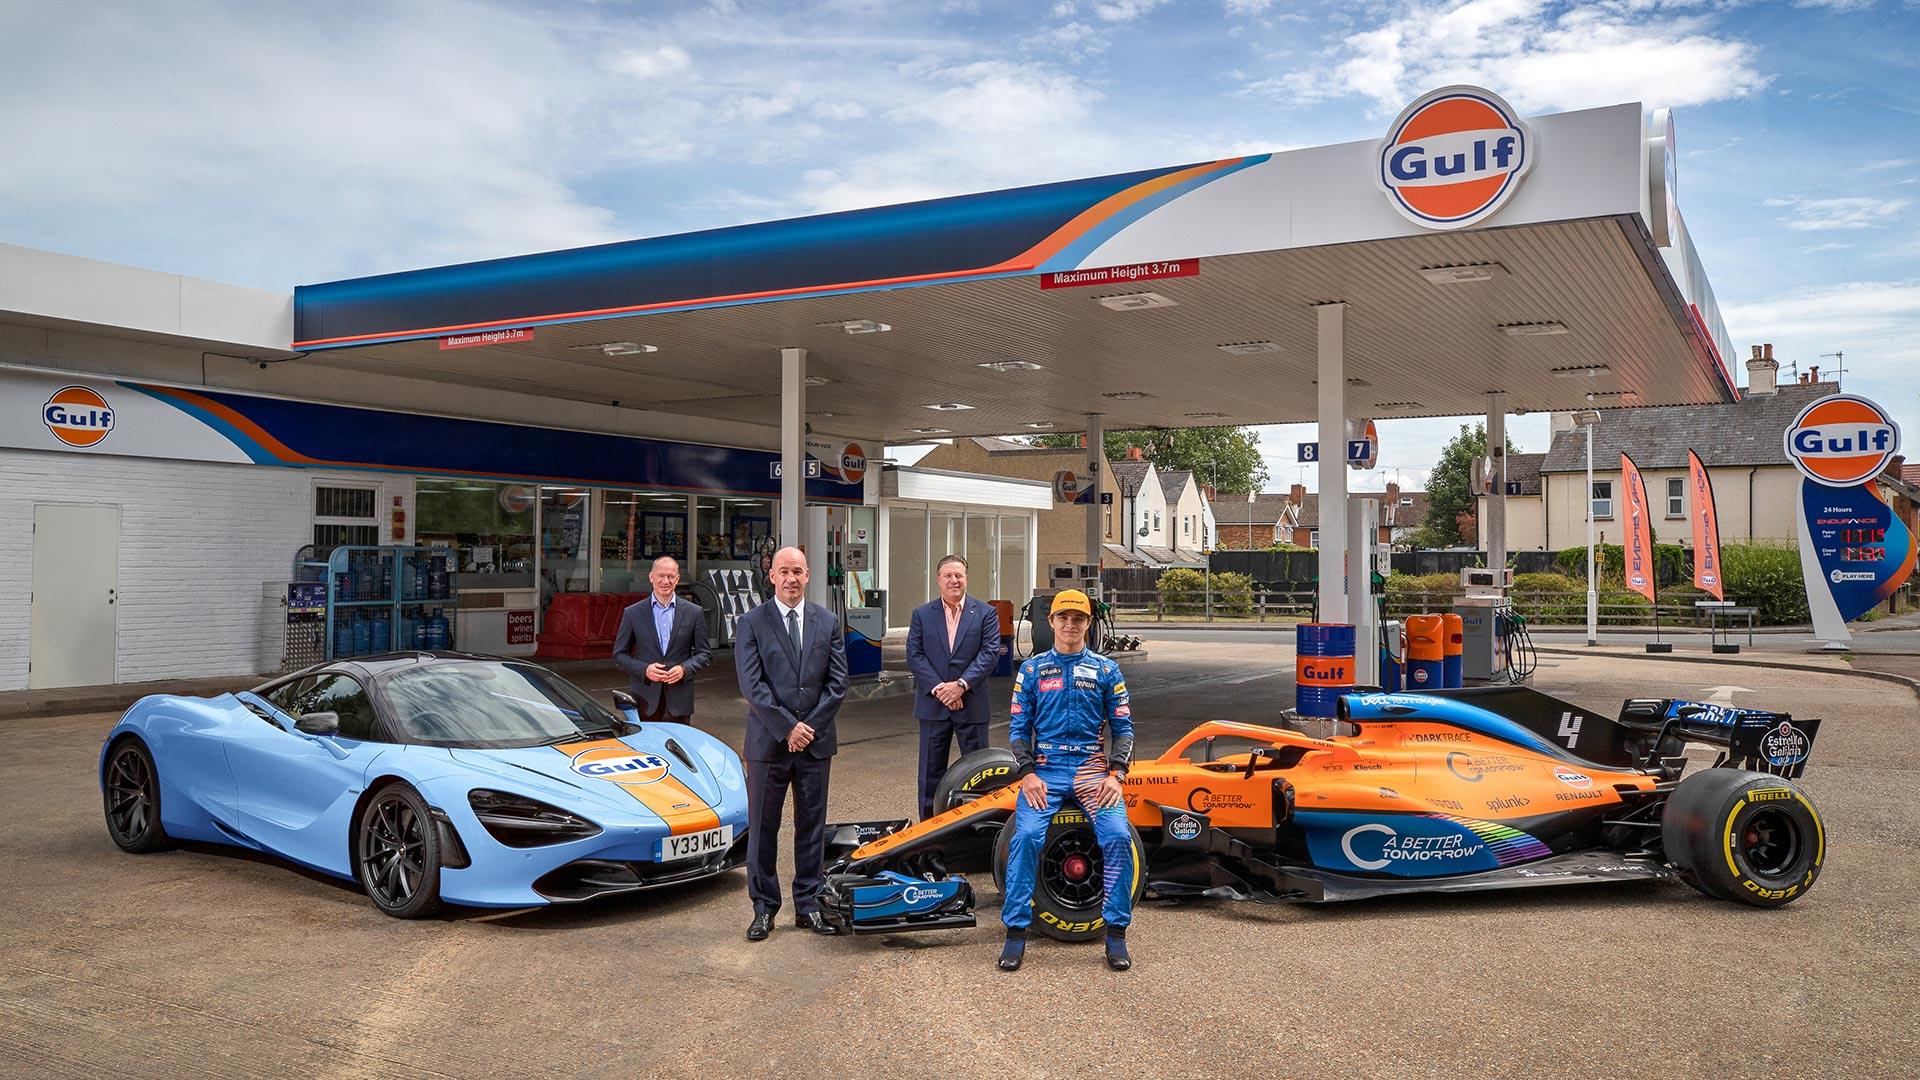 Gulf history in motorsports and their partnership with McLaren - Fueler store